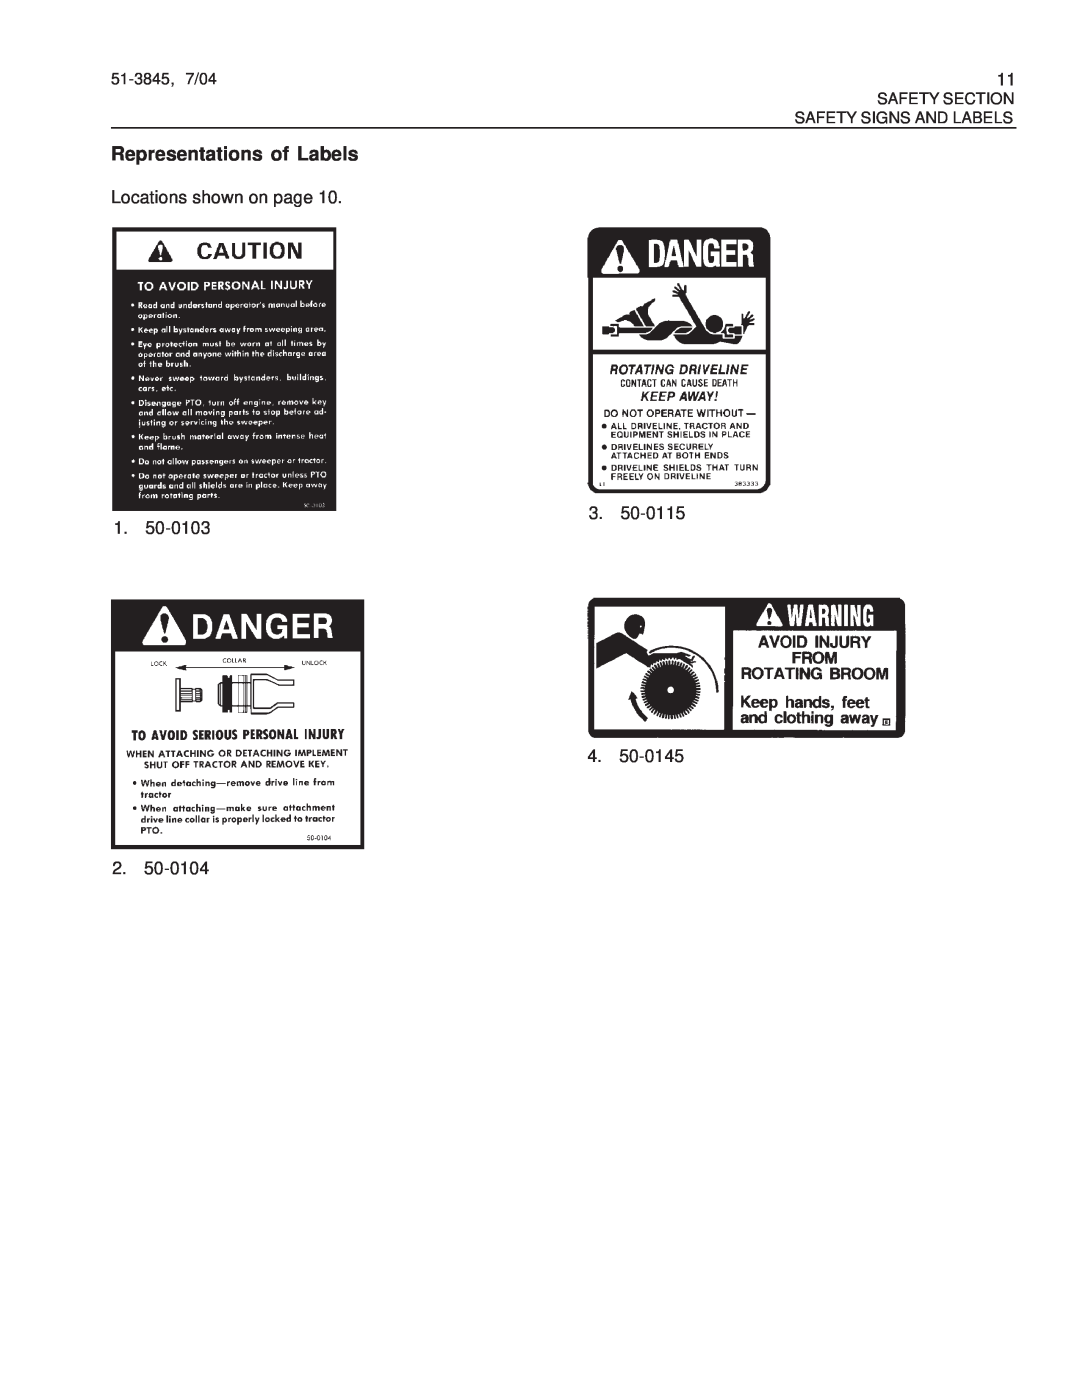 Snapper 151-3845, M26 Series manual Representations of Labels, Locations shown on page 3 